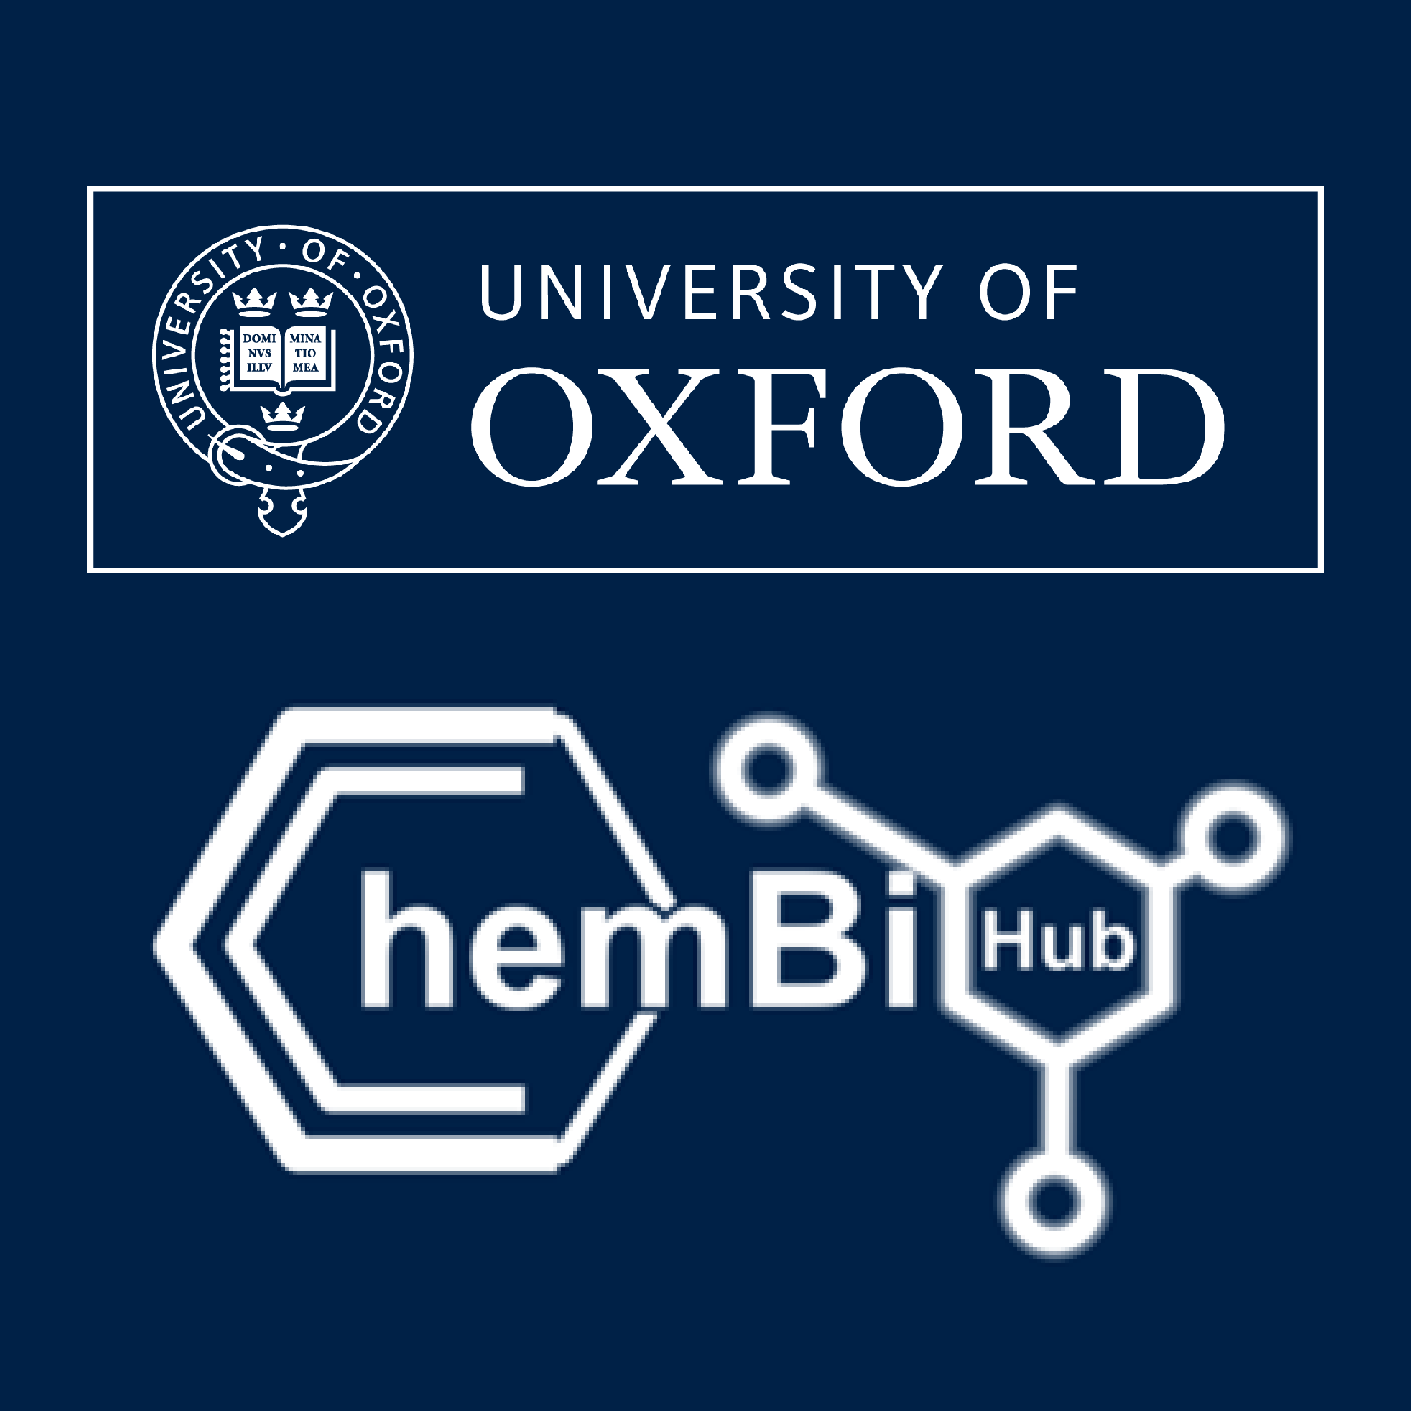 Enabling the discovery of chemical biology expertise, reagents and data within the University and beyond